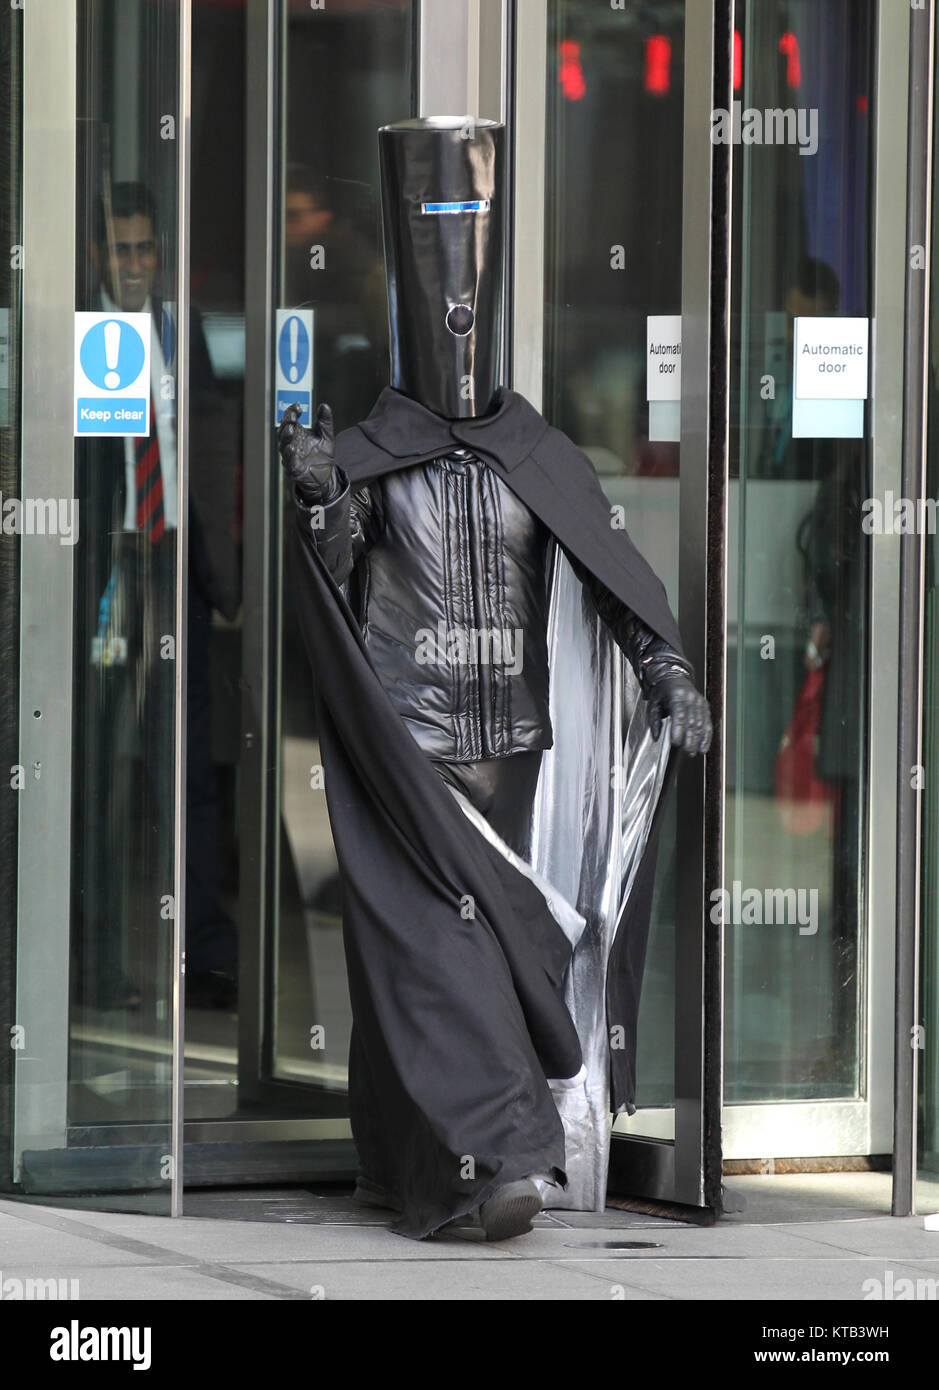 London, UK. 18th December, 2017. Lord Buckethead Political leader seen outside the BBC studios in London Stock Photo